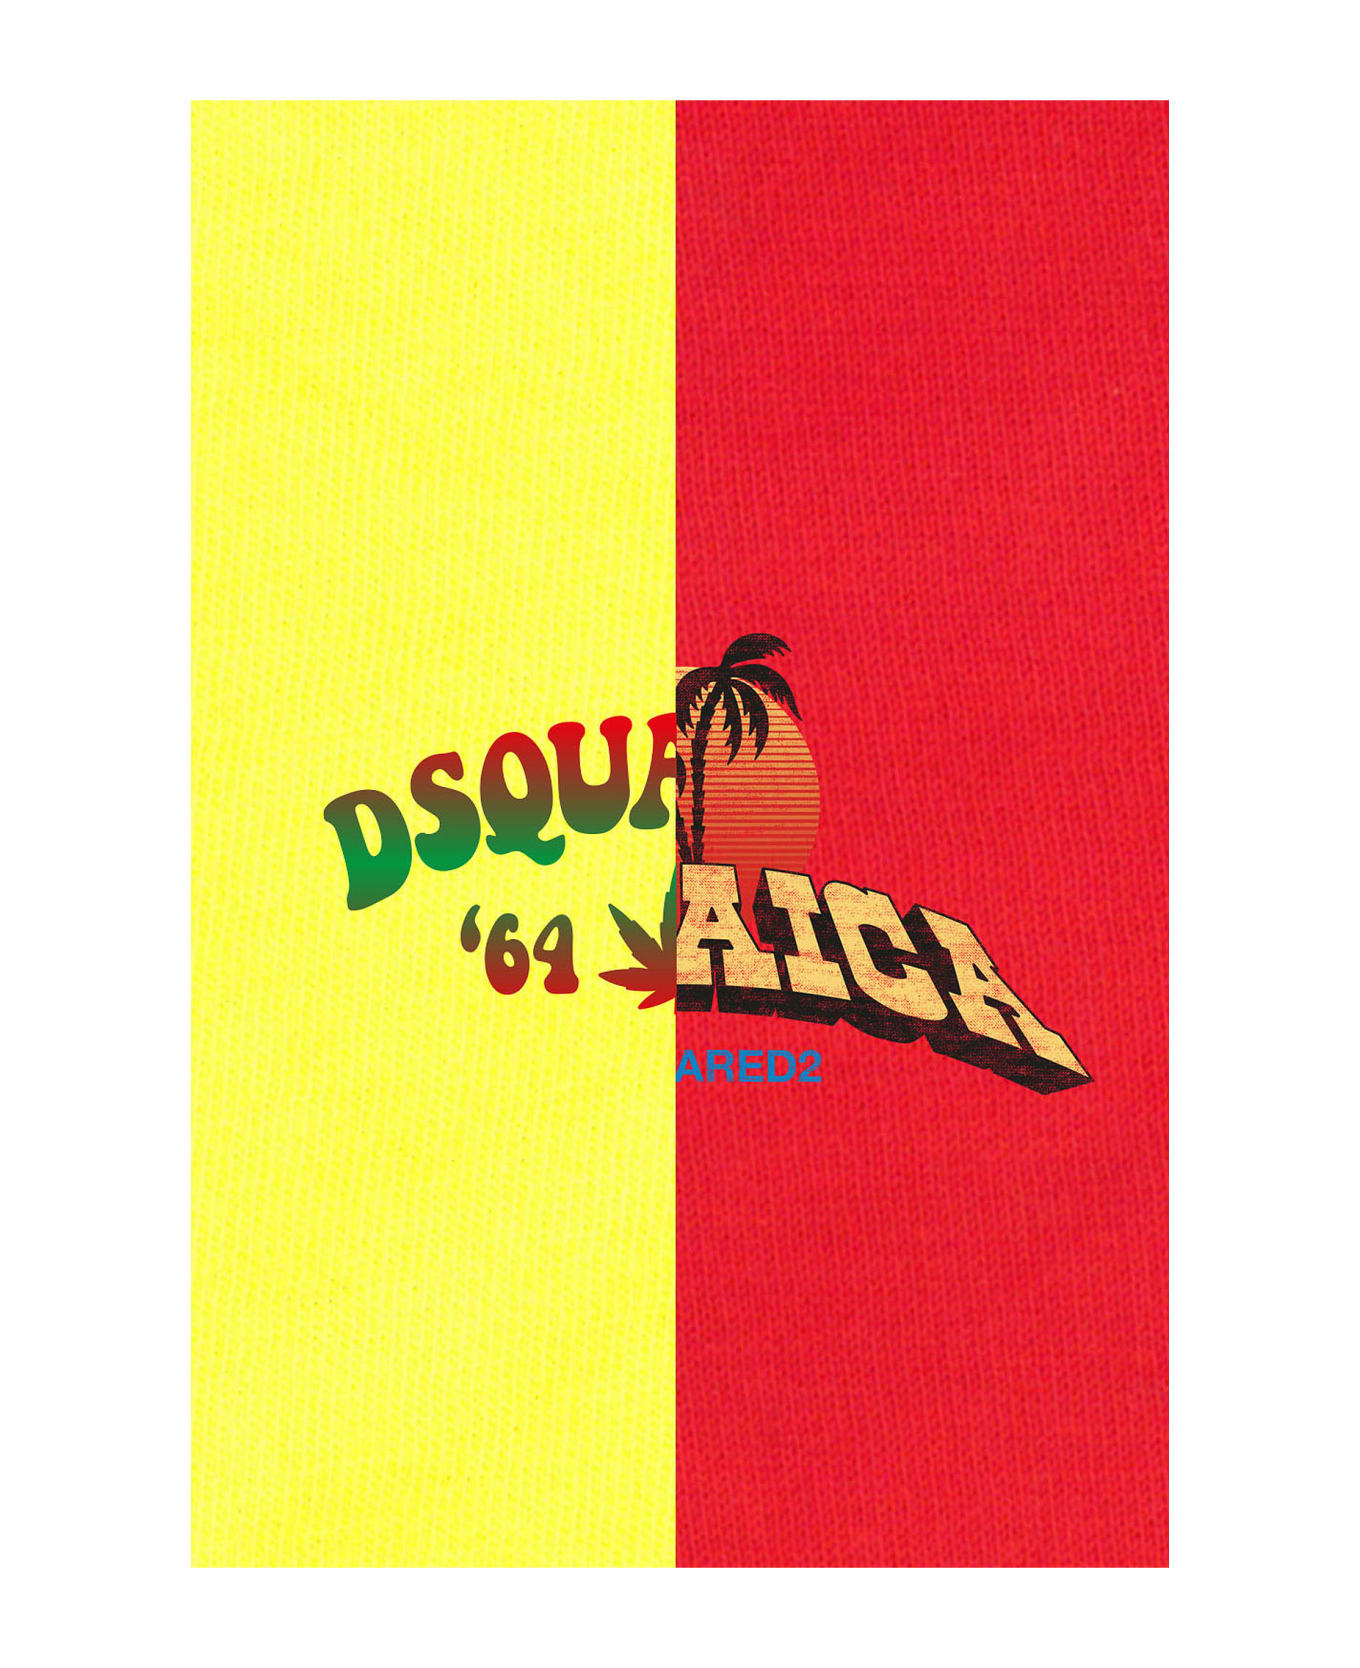 Dsquared2 T-shirts - Yellow/red